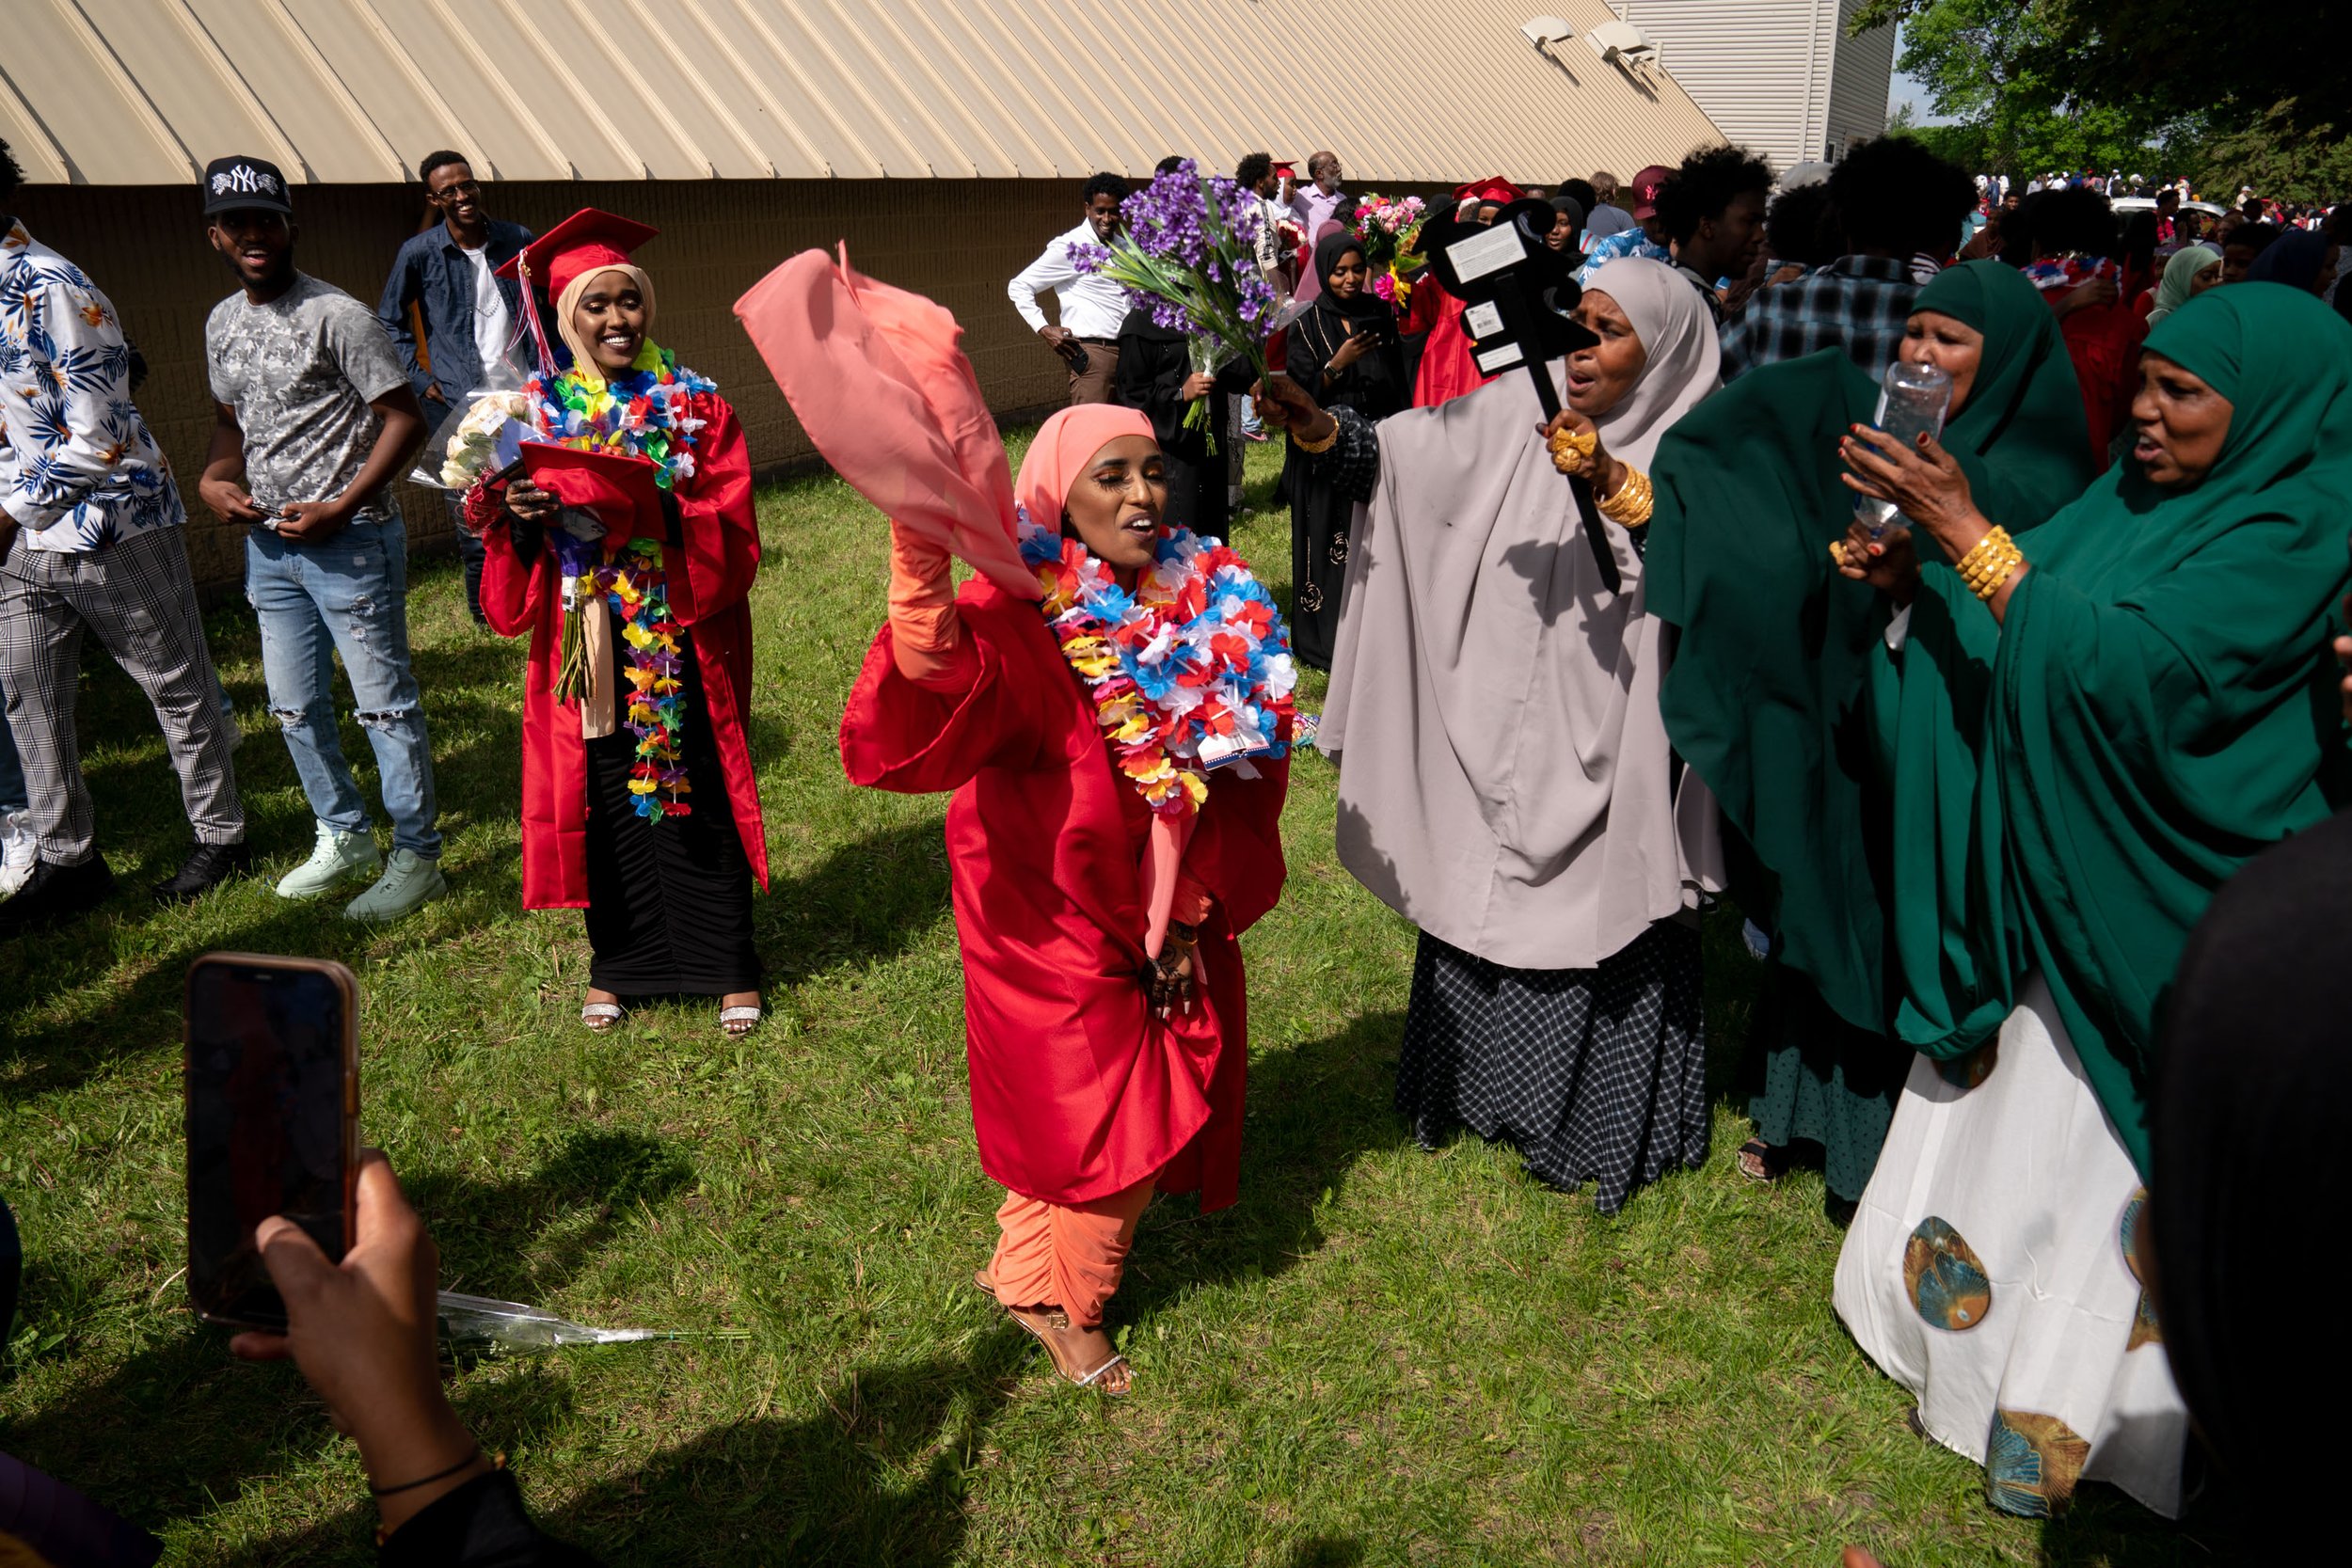  2022 Graduate Faiza Abdulahi, 18, dances to a beating drum as family and friends celebrate with her after the commencement ceremony at Willmar Senior High School in Willmar, Minn. 